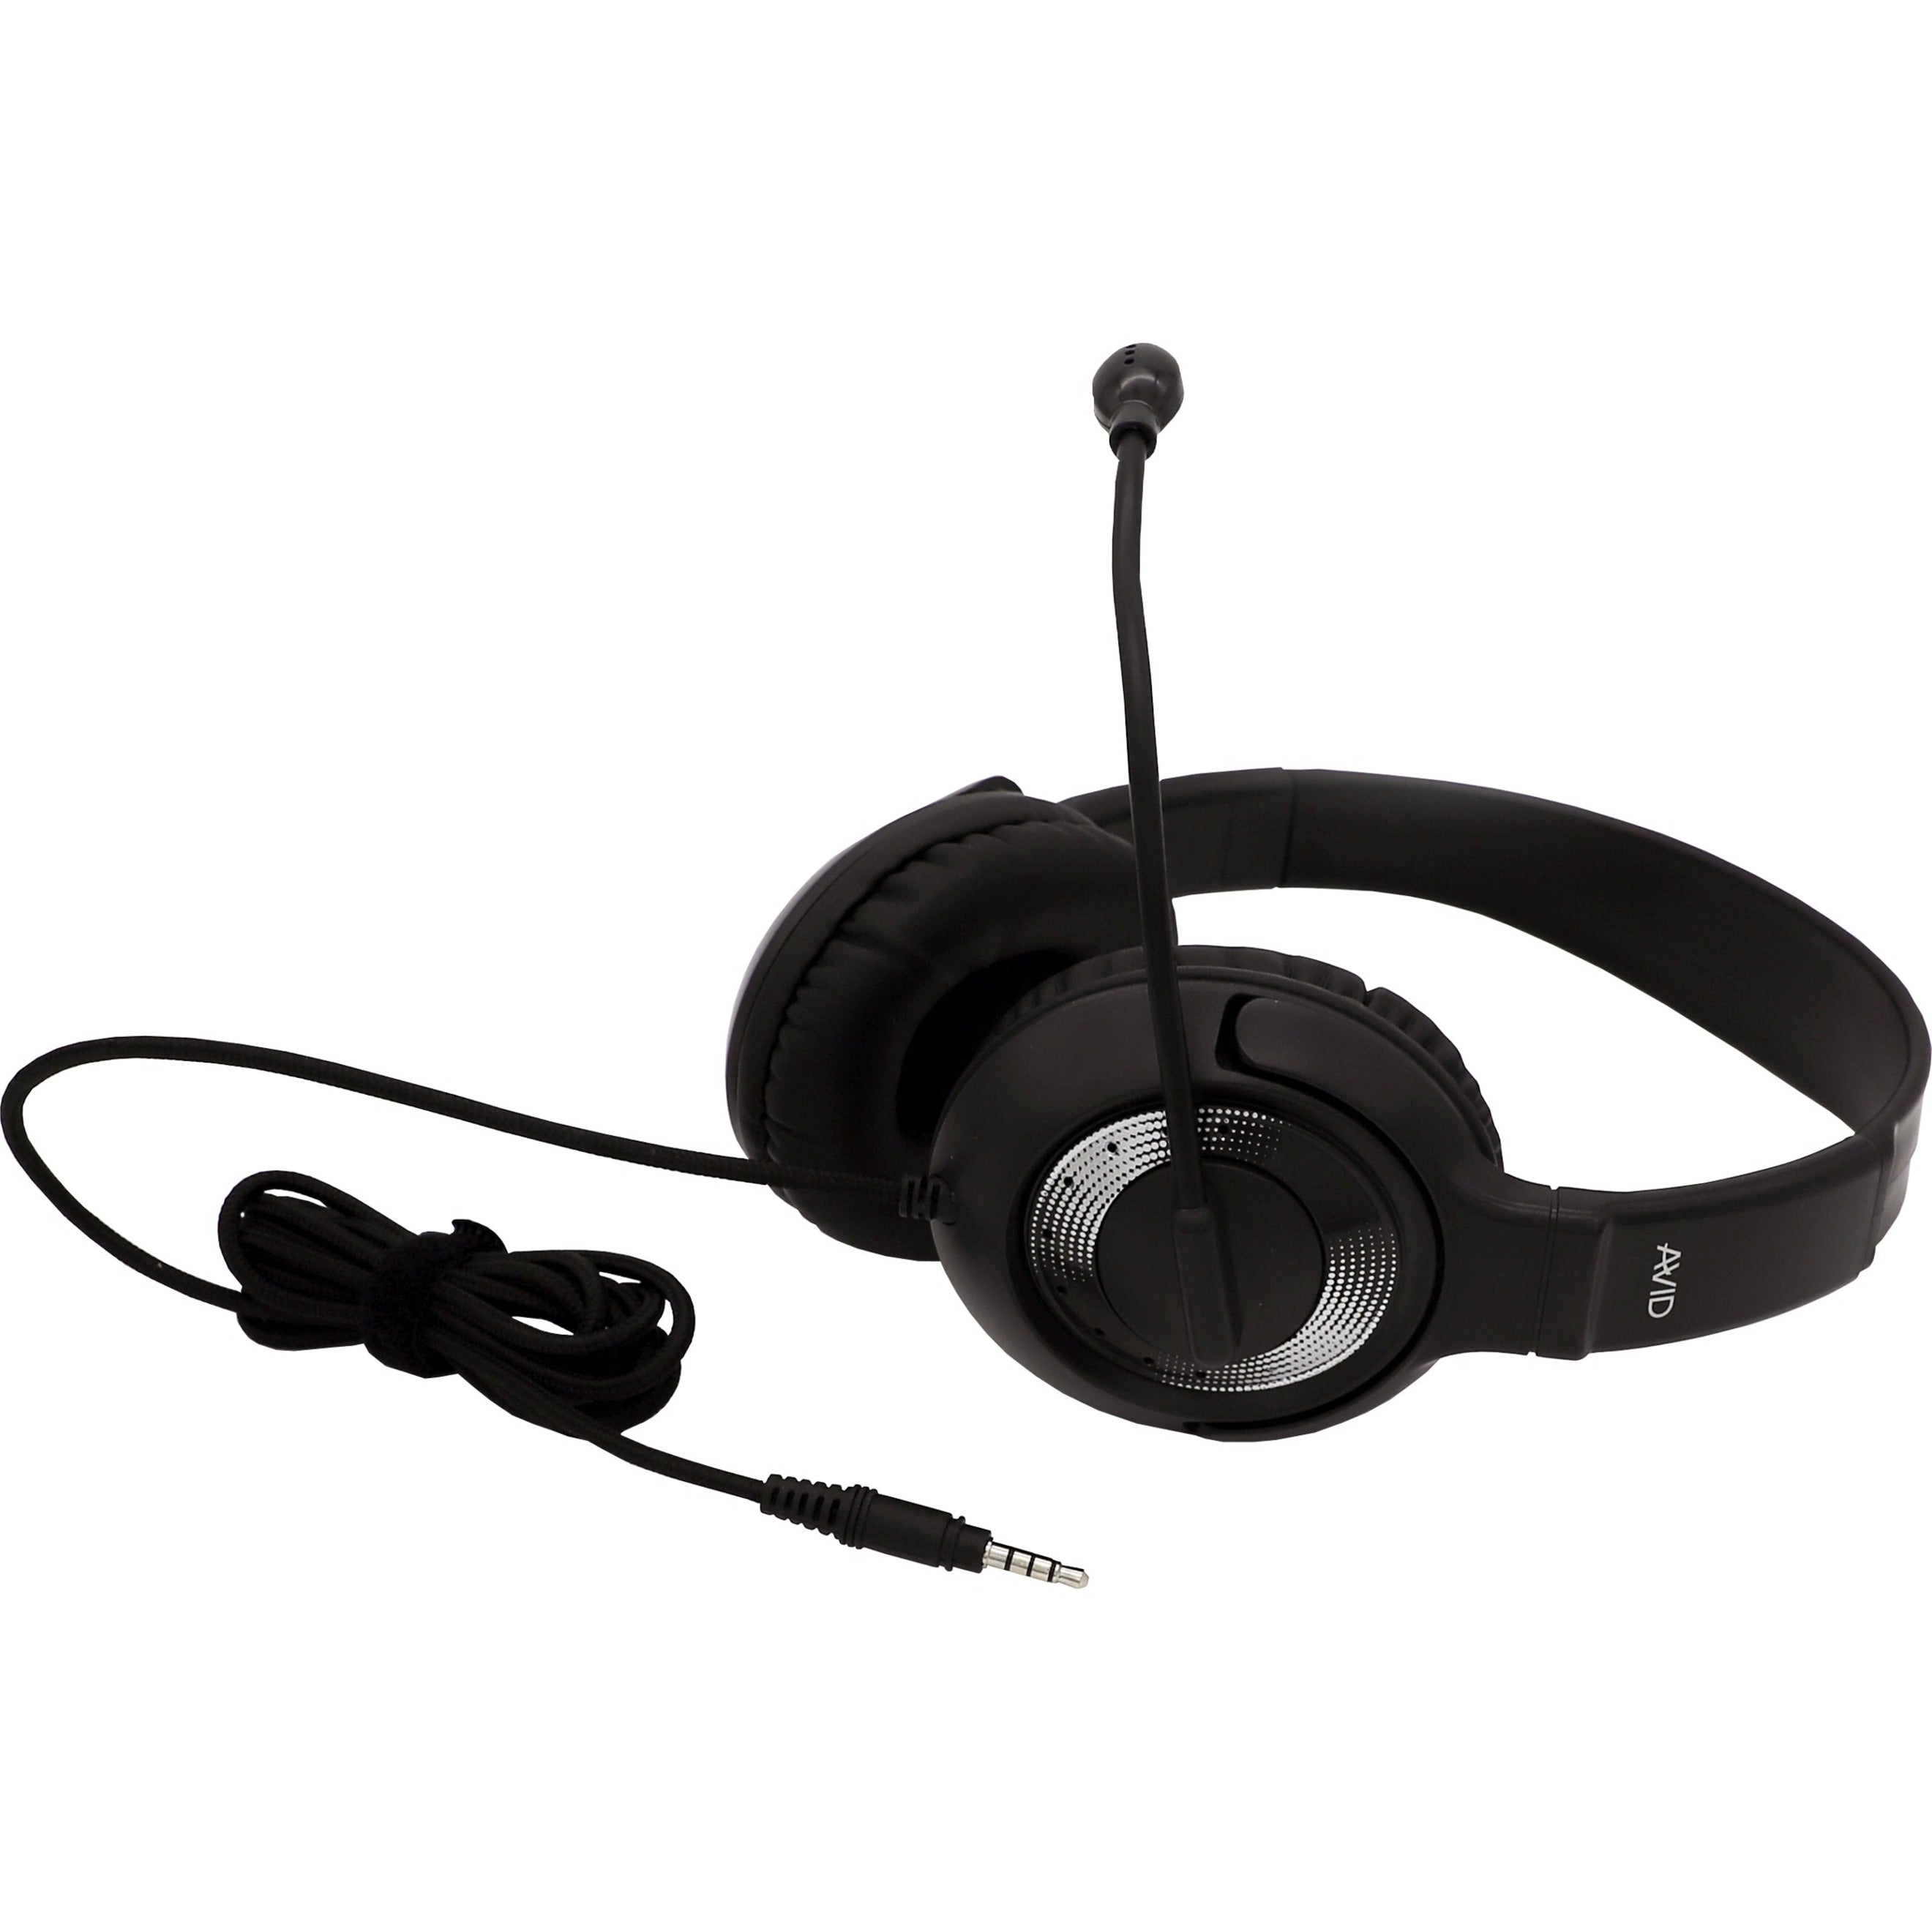 Avid Education 2AE55KL AE-55 Headset Over-the-head Binaural Headset with Noise Cancelling Microphone